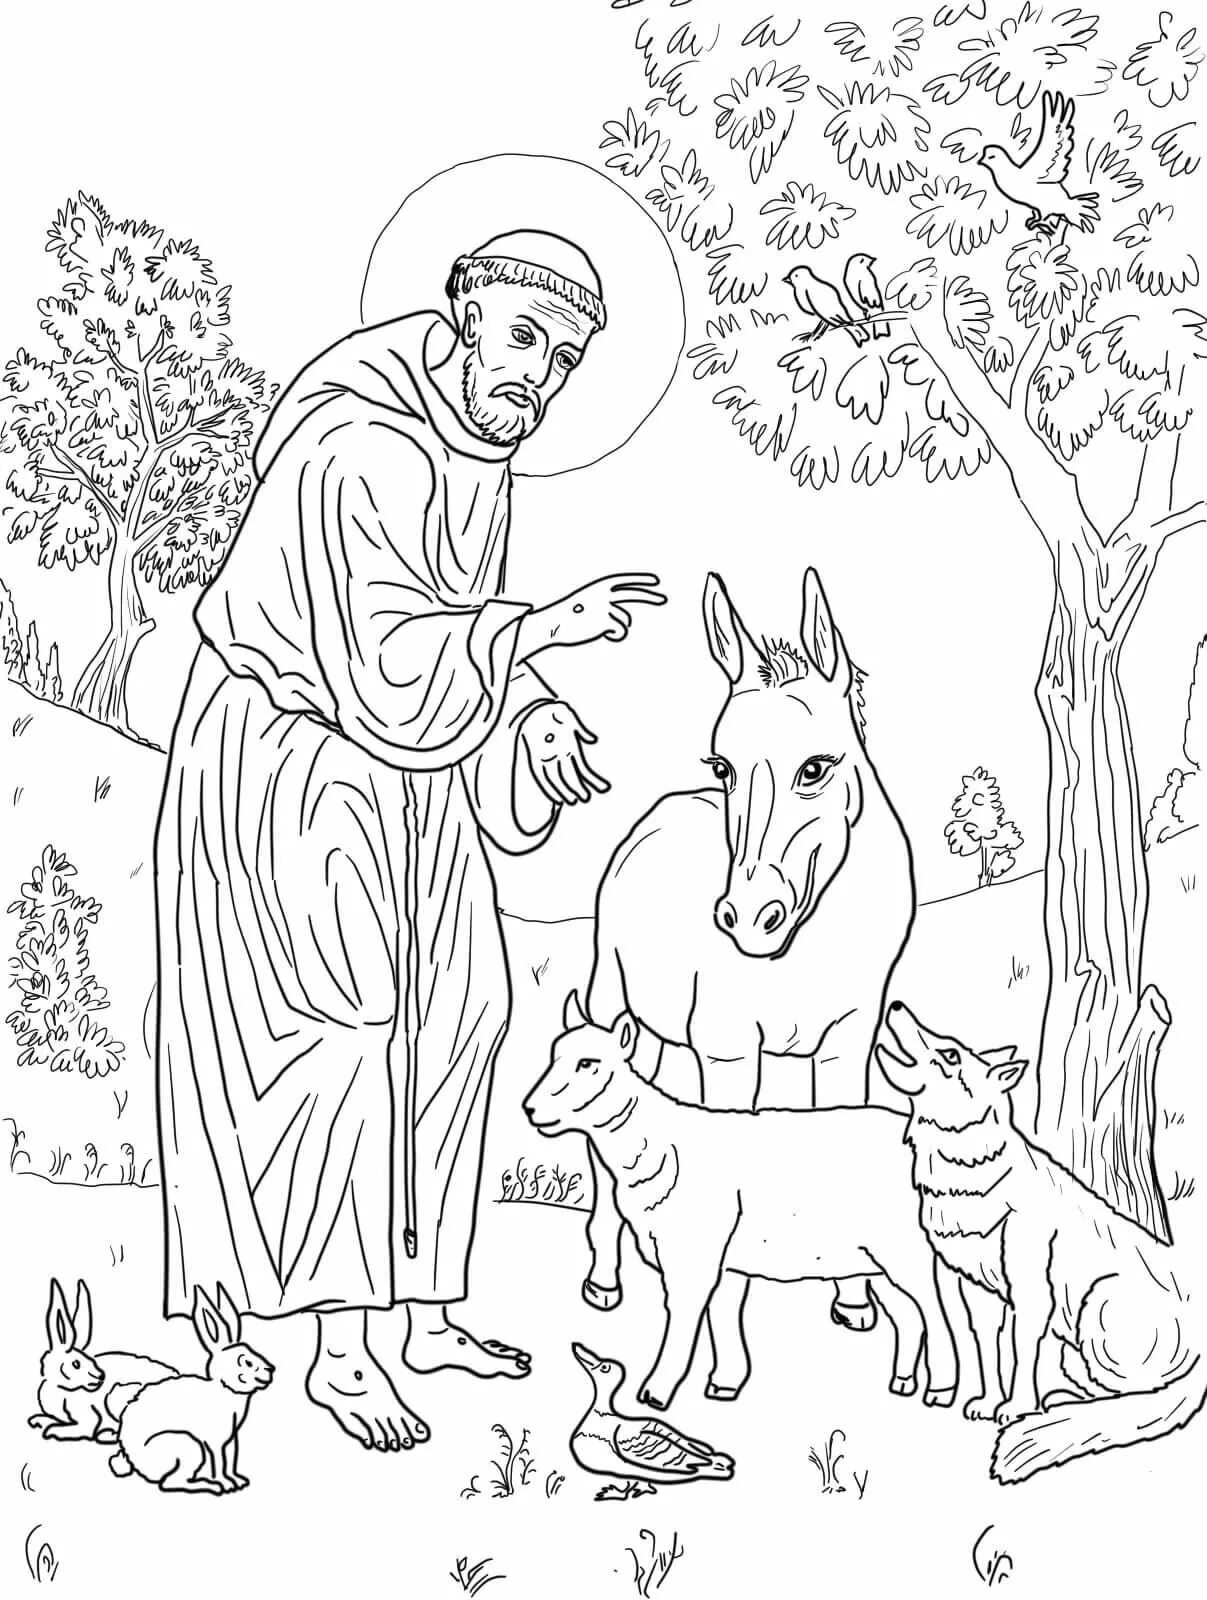 Great coloring pages of saints